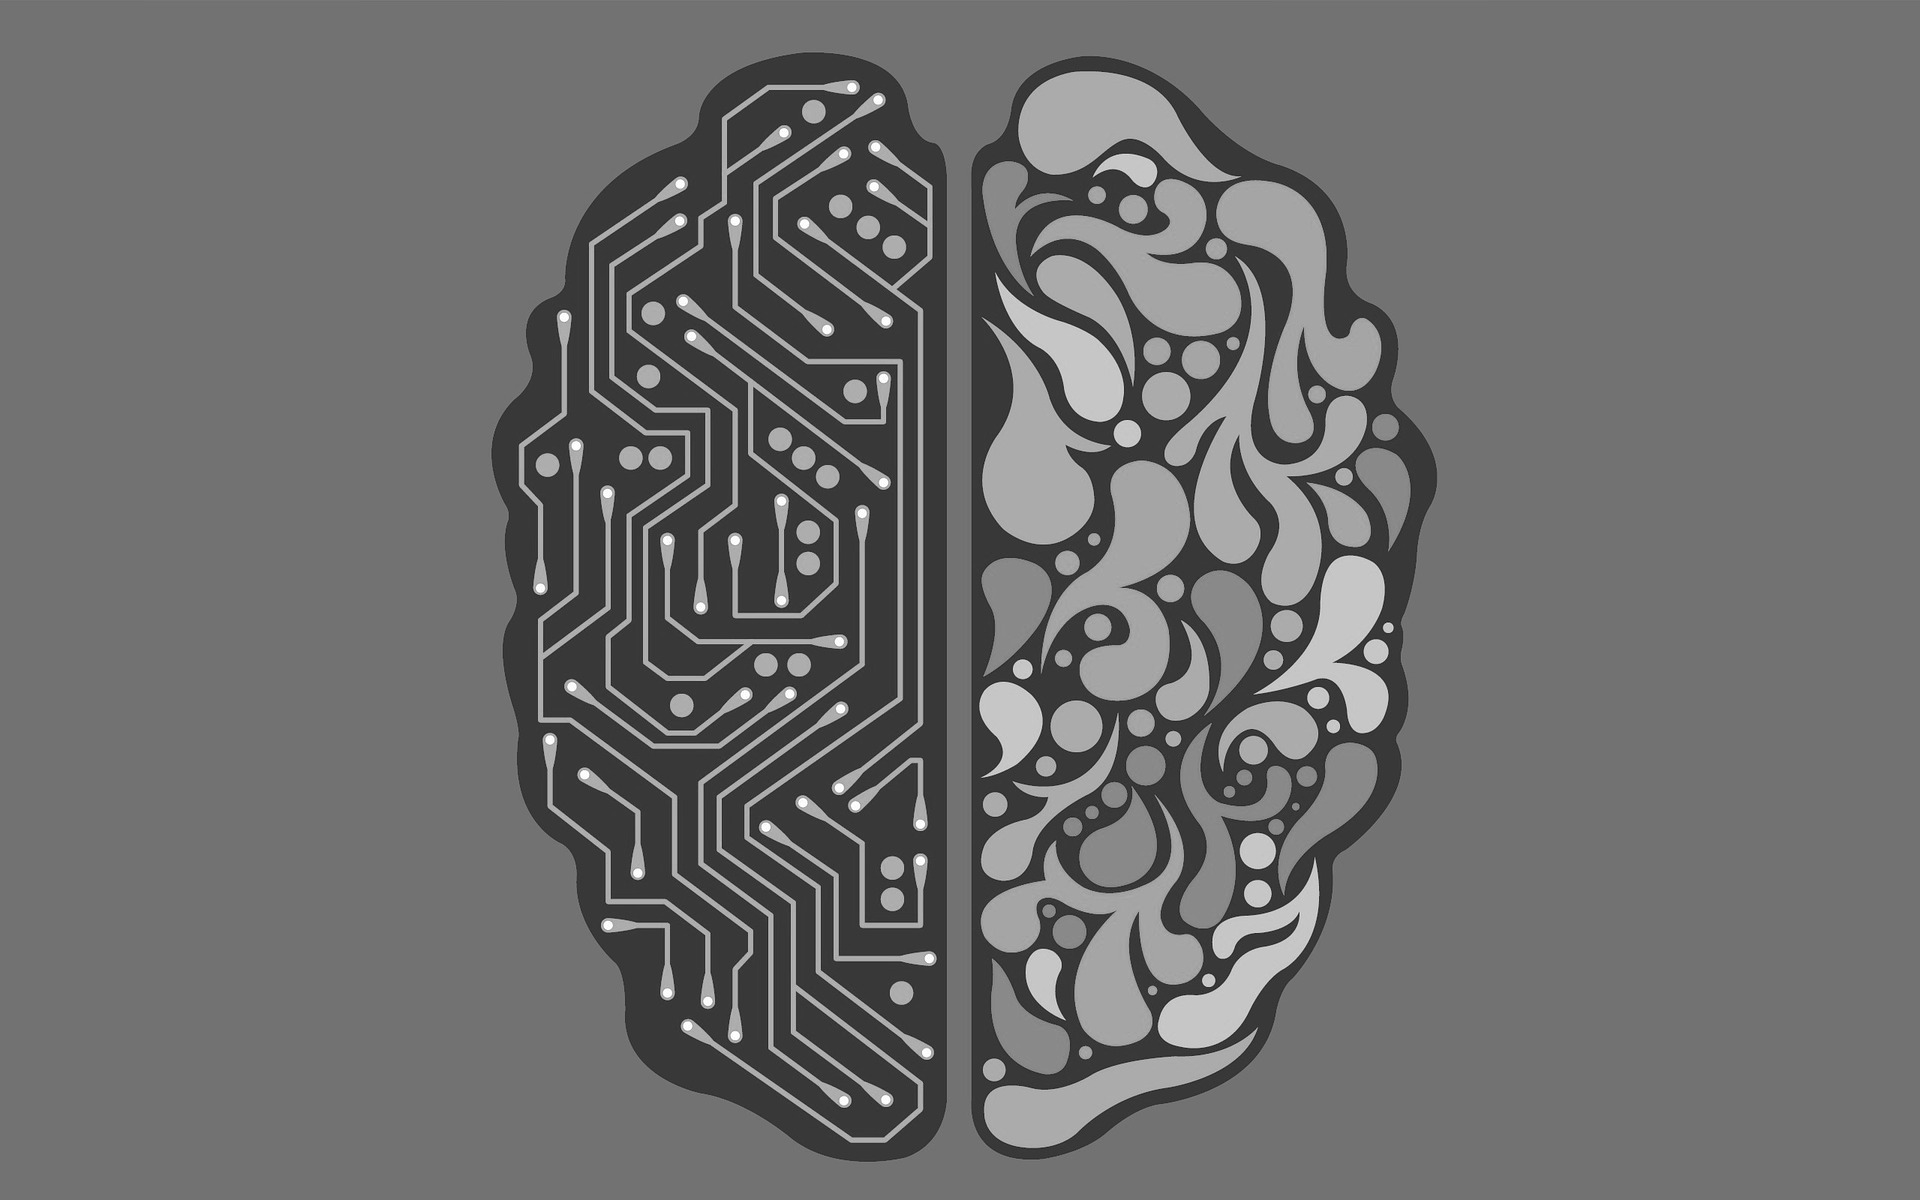 Using Social Cognition in Artificial Intelligence – by Max Garcia